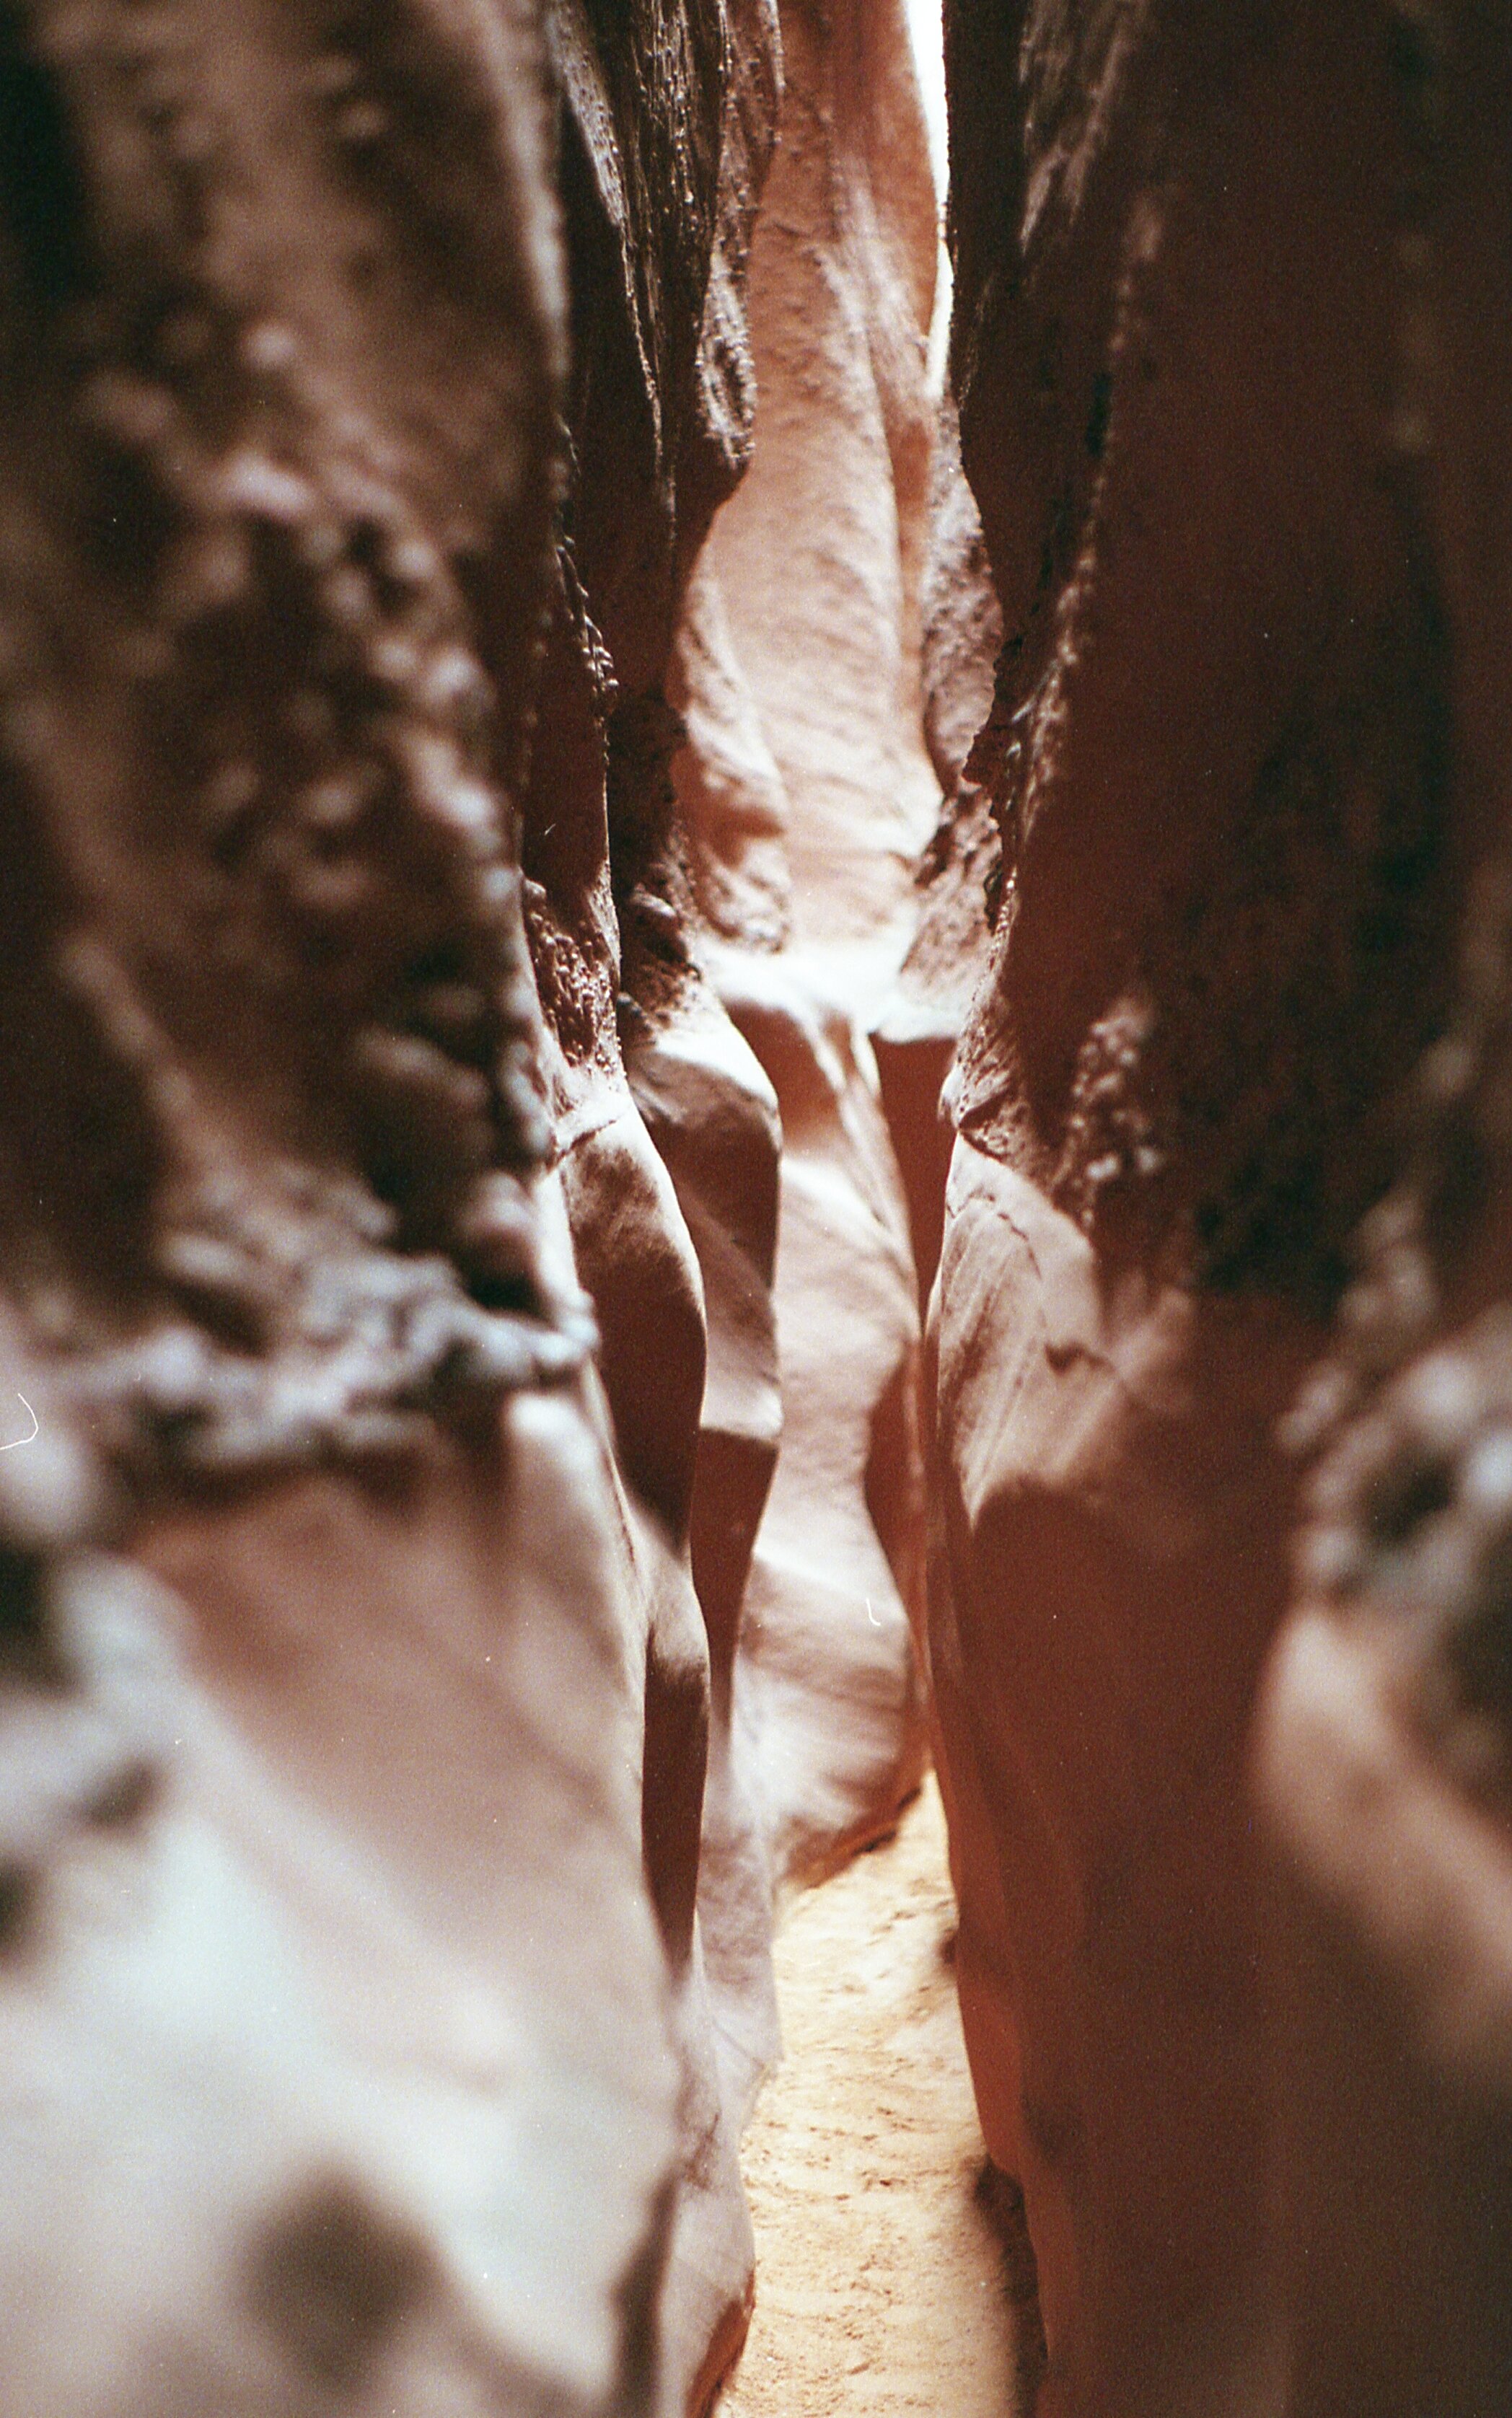  Digital scan of color film: Slot canyon in Grand Staircase-Escalante National Monument, Utah, 2019 